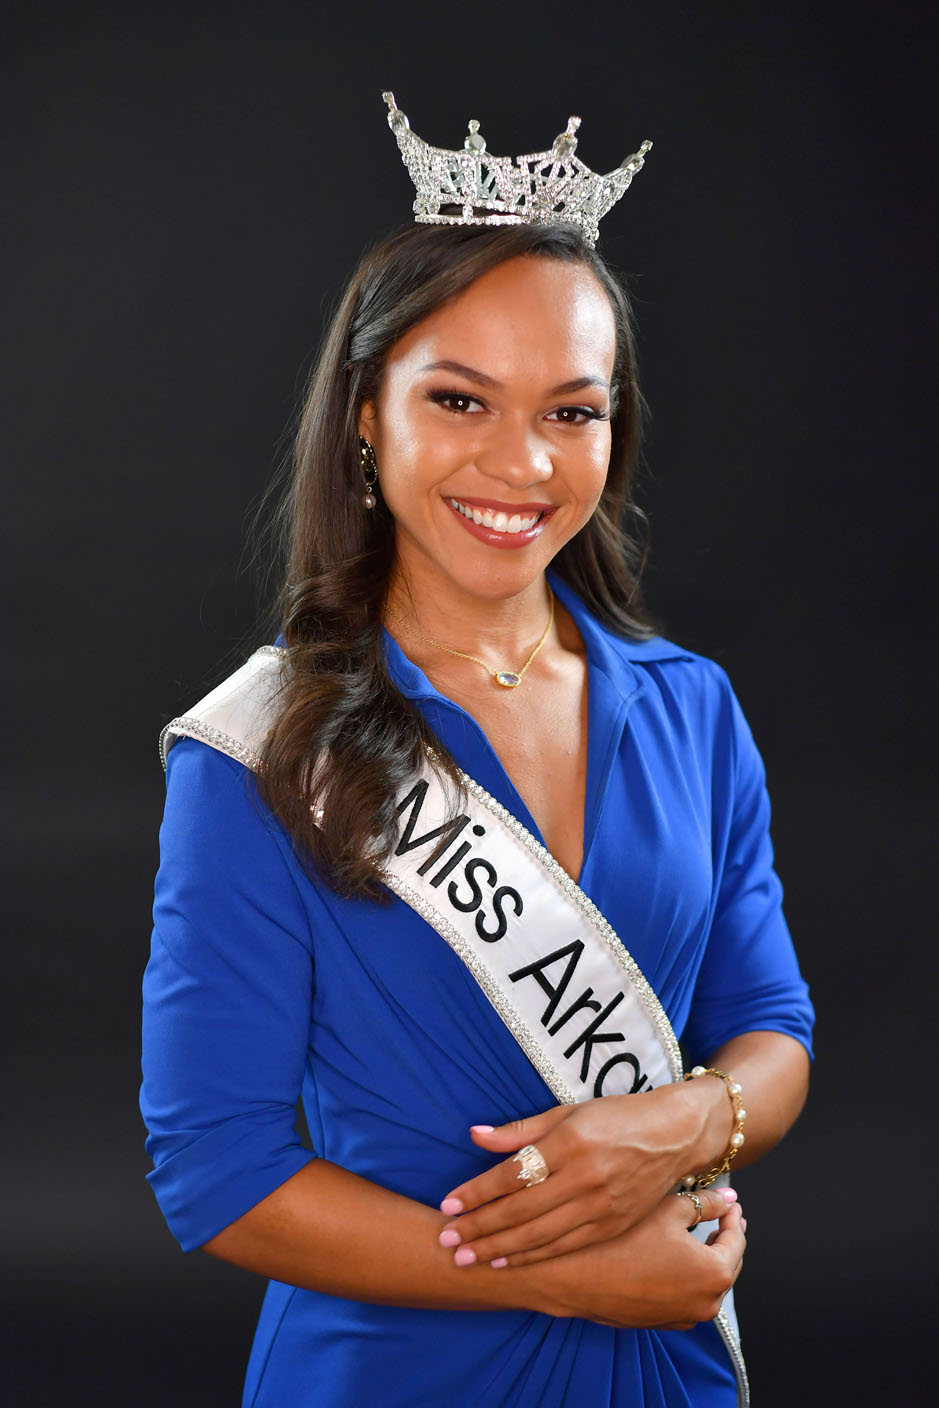 There she is … Persistence pays off for new Miss Arkansas